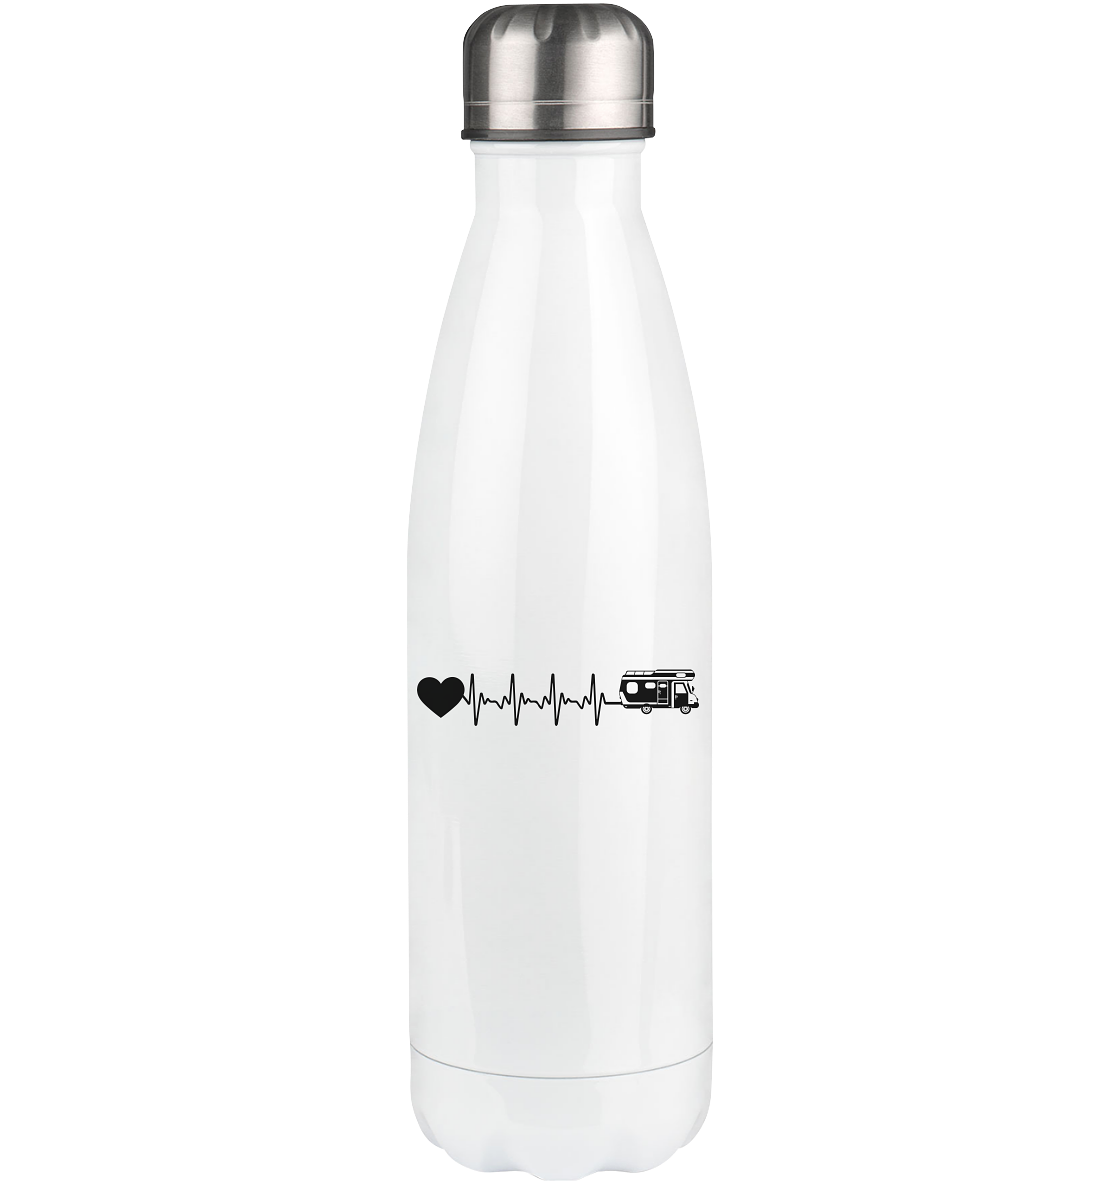 Heartbeat Heart and Camping - Edelstahl Thermosflasche camping 500ml